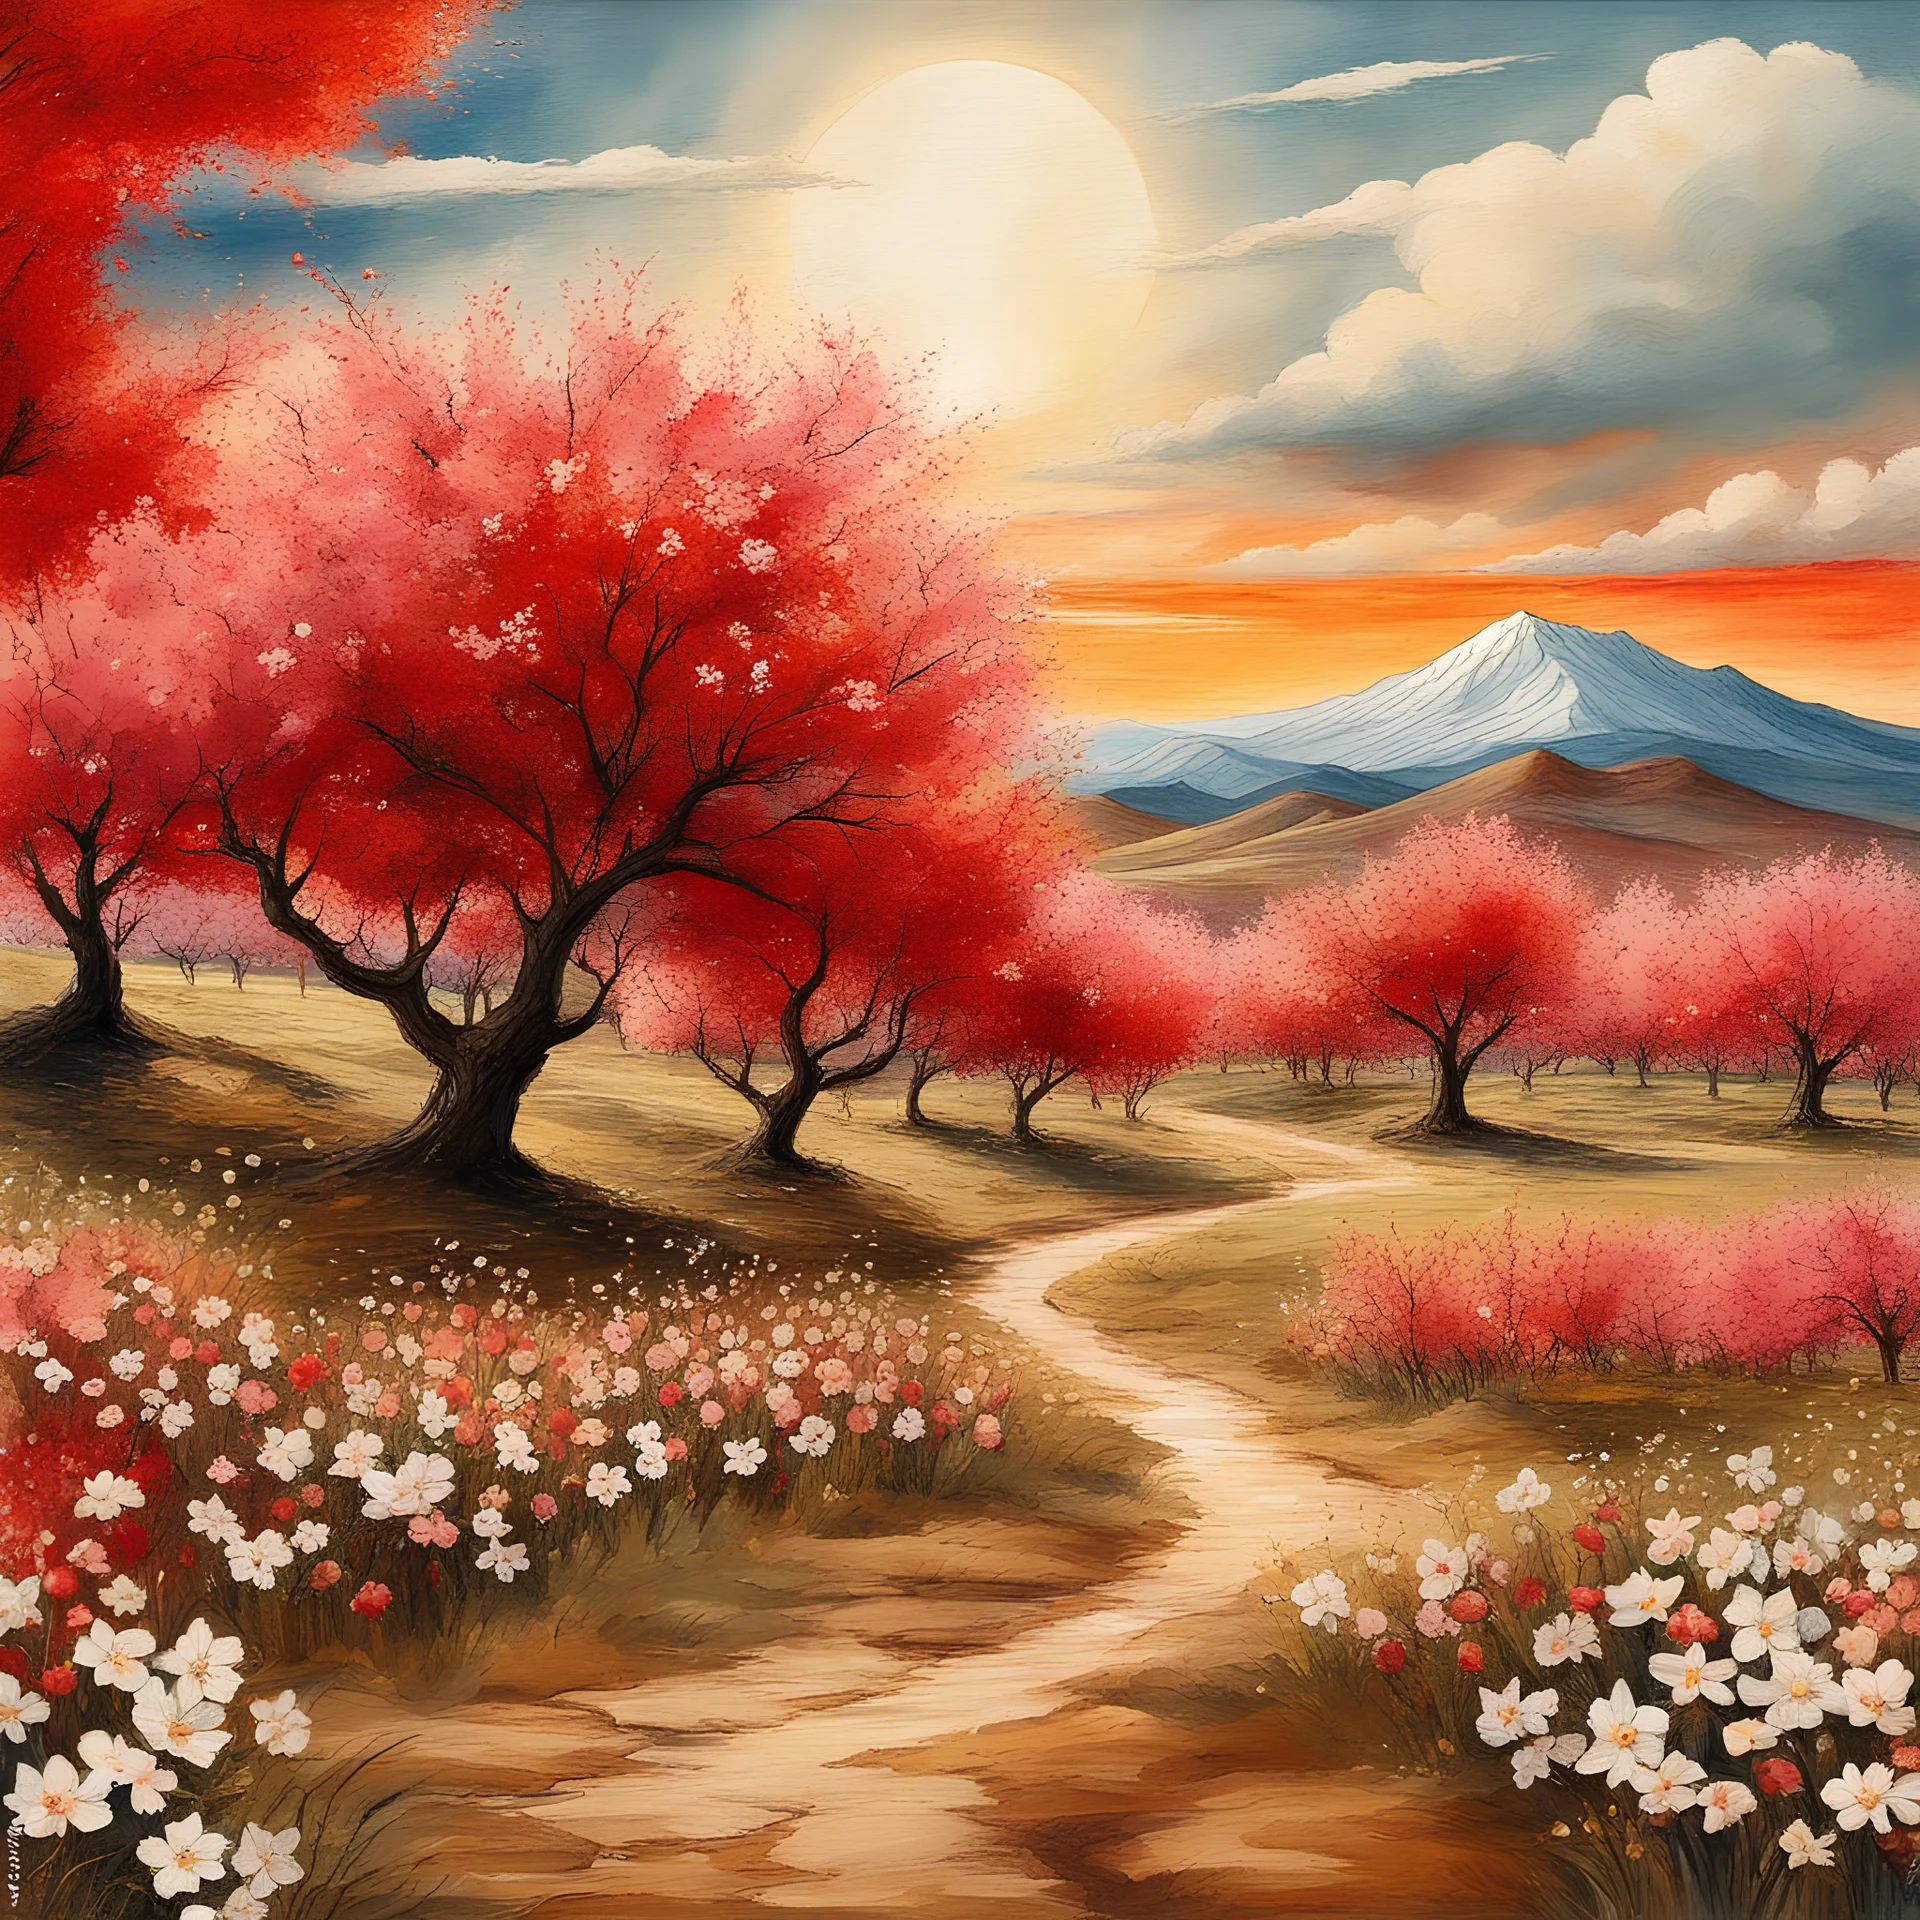 cinematic 16k resolution masterpiece illustration painting consisting of oil, watercolors and ink :: orchard of blooming red peach trees romantic naturalism landscape :: conveys terror and horror :: detailed background mountains white cerastiums flowers creek :: frisco watercolors and oil sky multi-colored bright large sun cloudscape :: vibrant rustic red and white palette :: intricate motifs perfect composition insanely-detailed extreme-detailed hyper-detailed volumetric deep rich colors volume